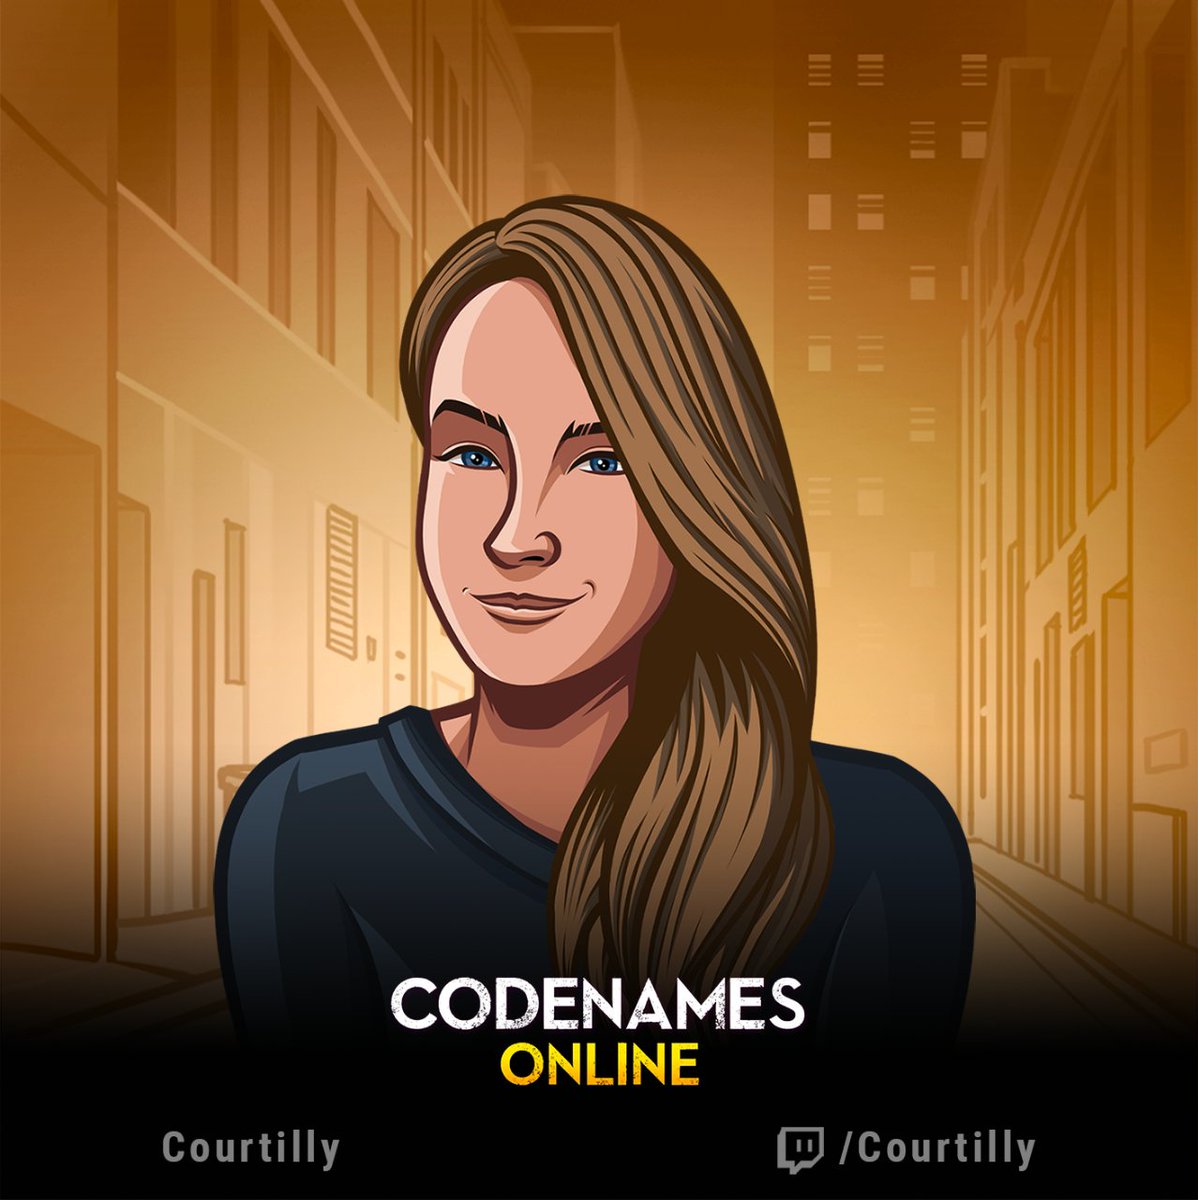 #CNcelebration

If you’re looking for cozy and chill streams, @itscourtilly is your person! You can often find her streaming #Codenames, but she also enjoys social deduction games like Project Winter, Among Us, and First Class Trouble.

📺 twitch.tv/courtilly
⏱️ Eastern Time